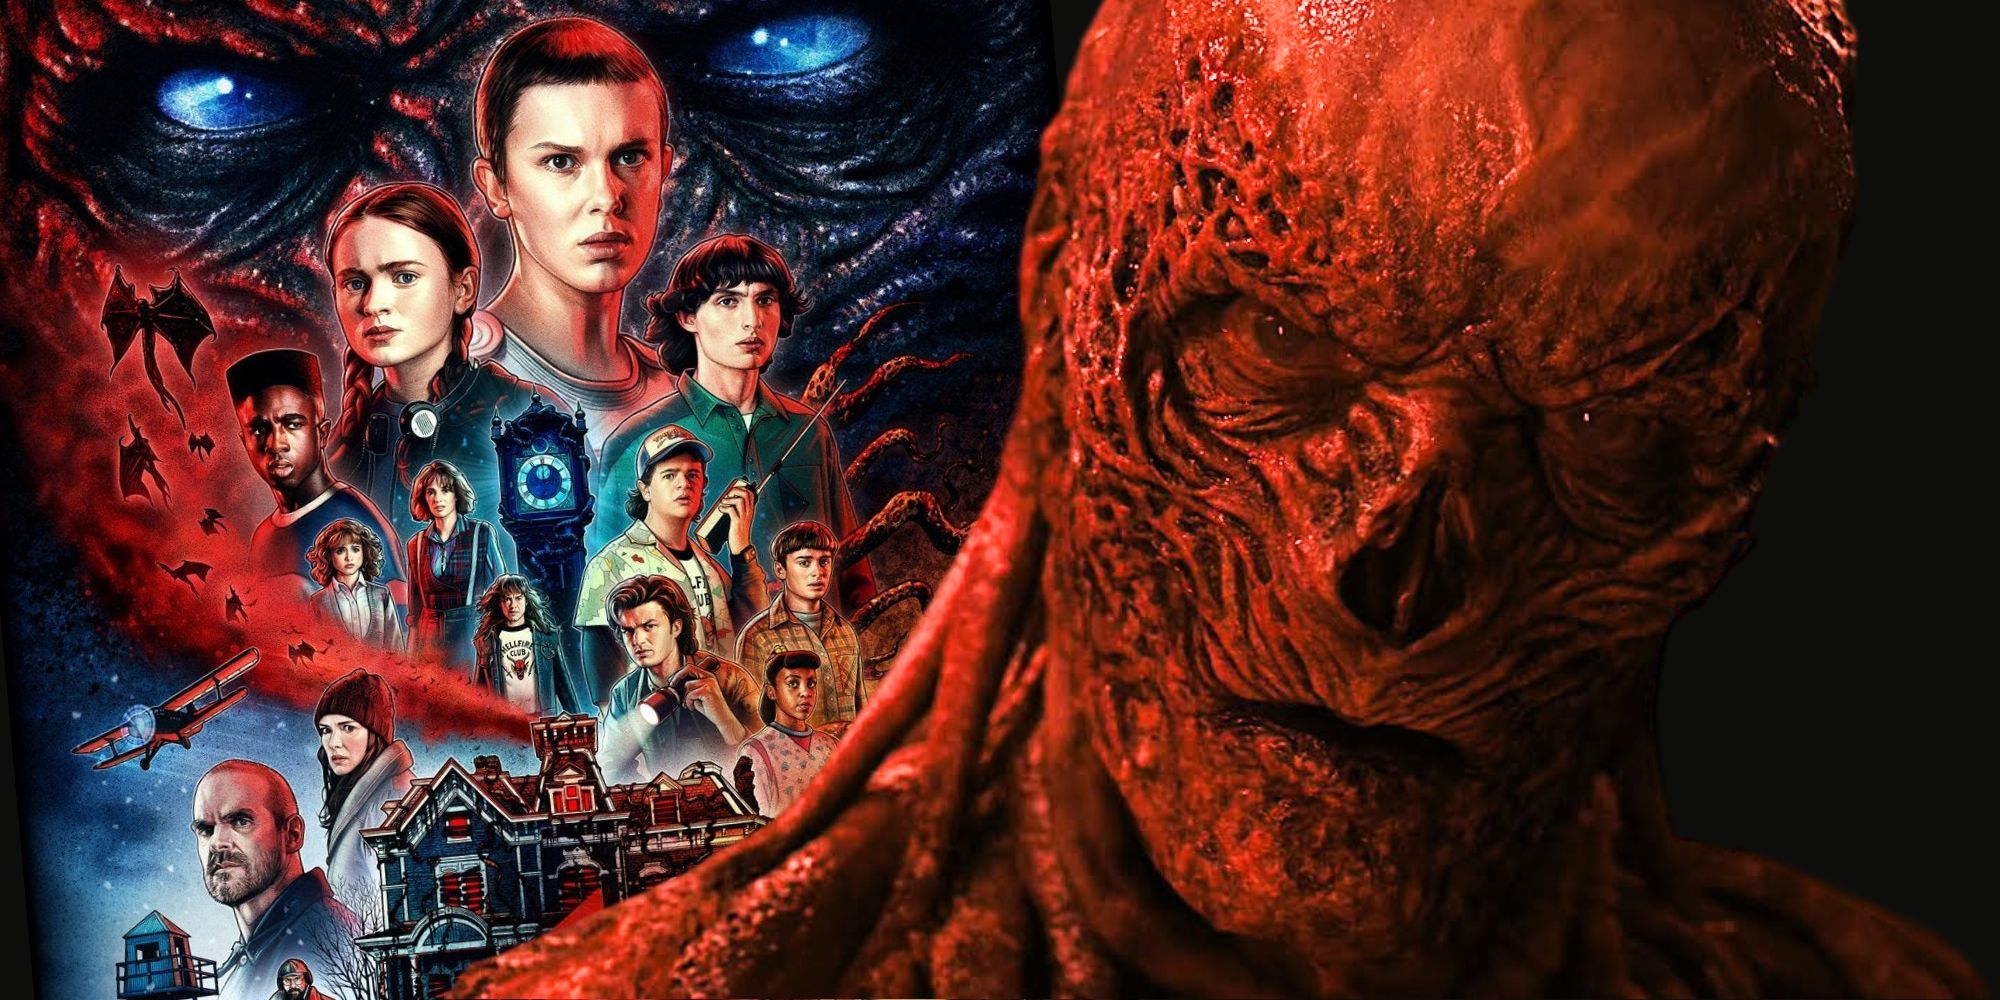 A poster for Stranger Things 4 behind a close-up of Vecna